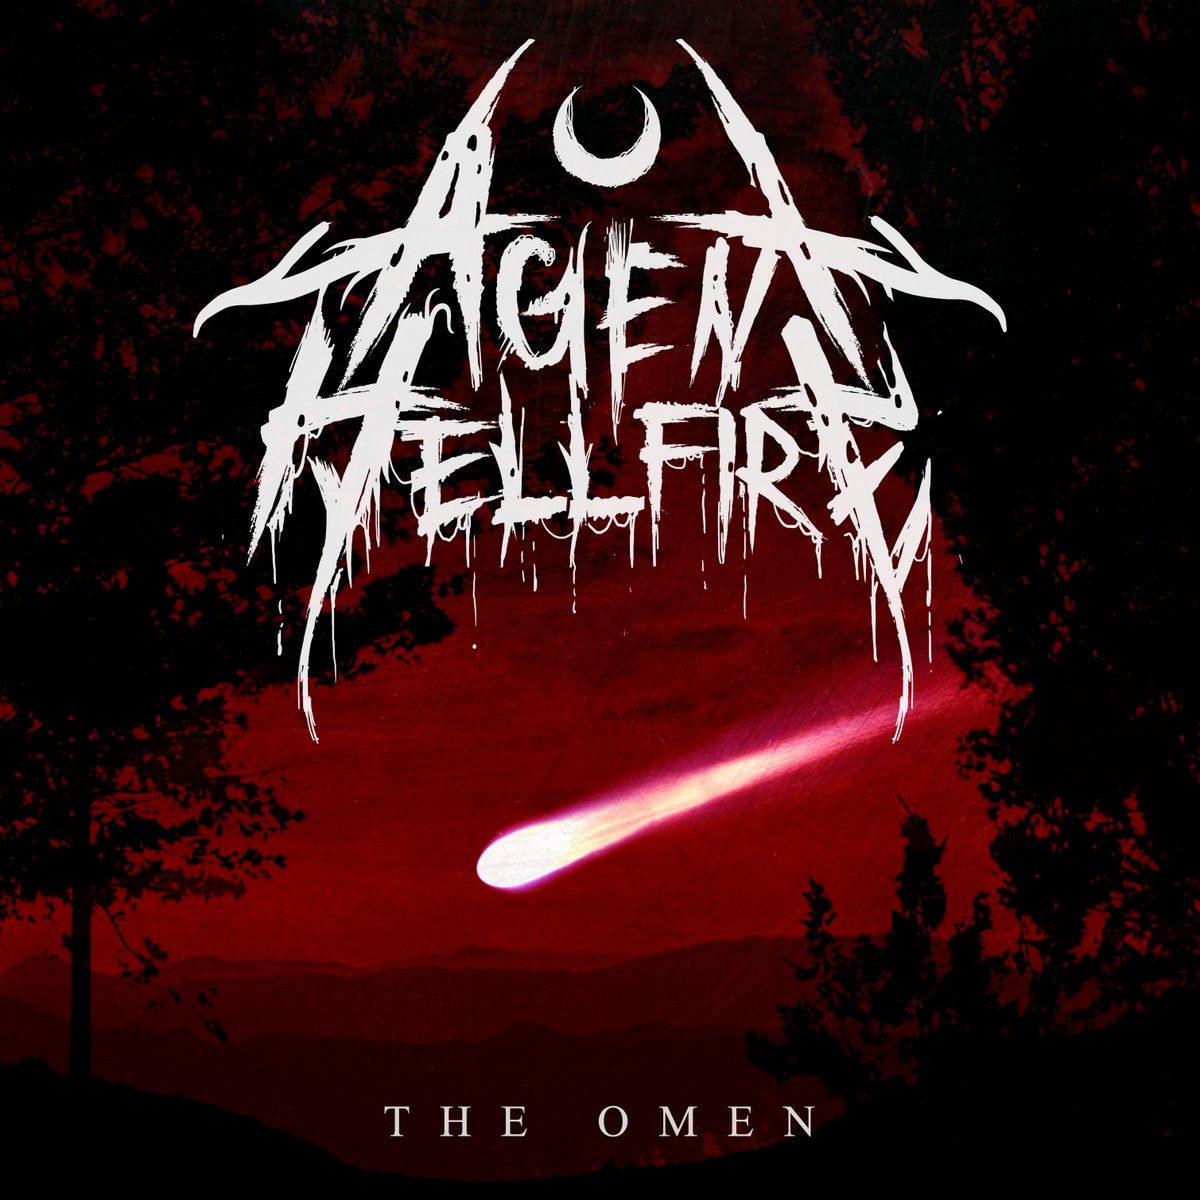 We present to you 'The Omen', our first EP that will be released on October 30th.

#thrashmetal #powertrio #newband #EPrelease #metalband #metalbands #berlinmetal #brazilianmetal #brazilianthrashmetal #thrash #germanthrashmetal #HeavyMetal